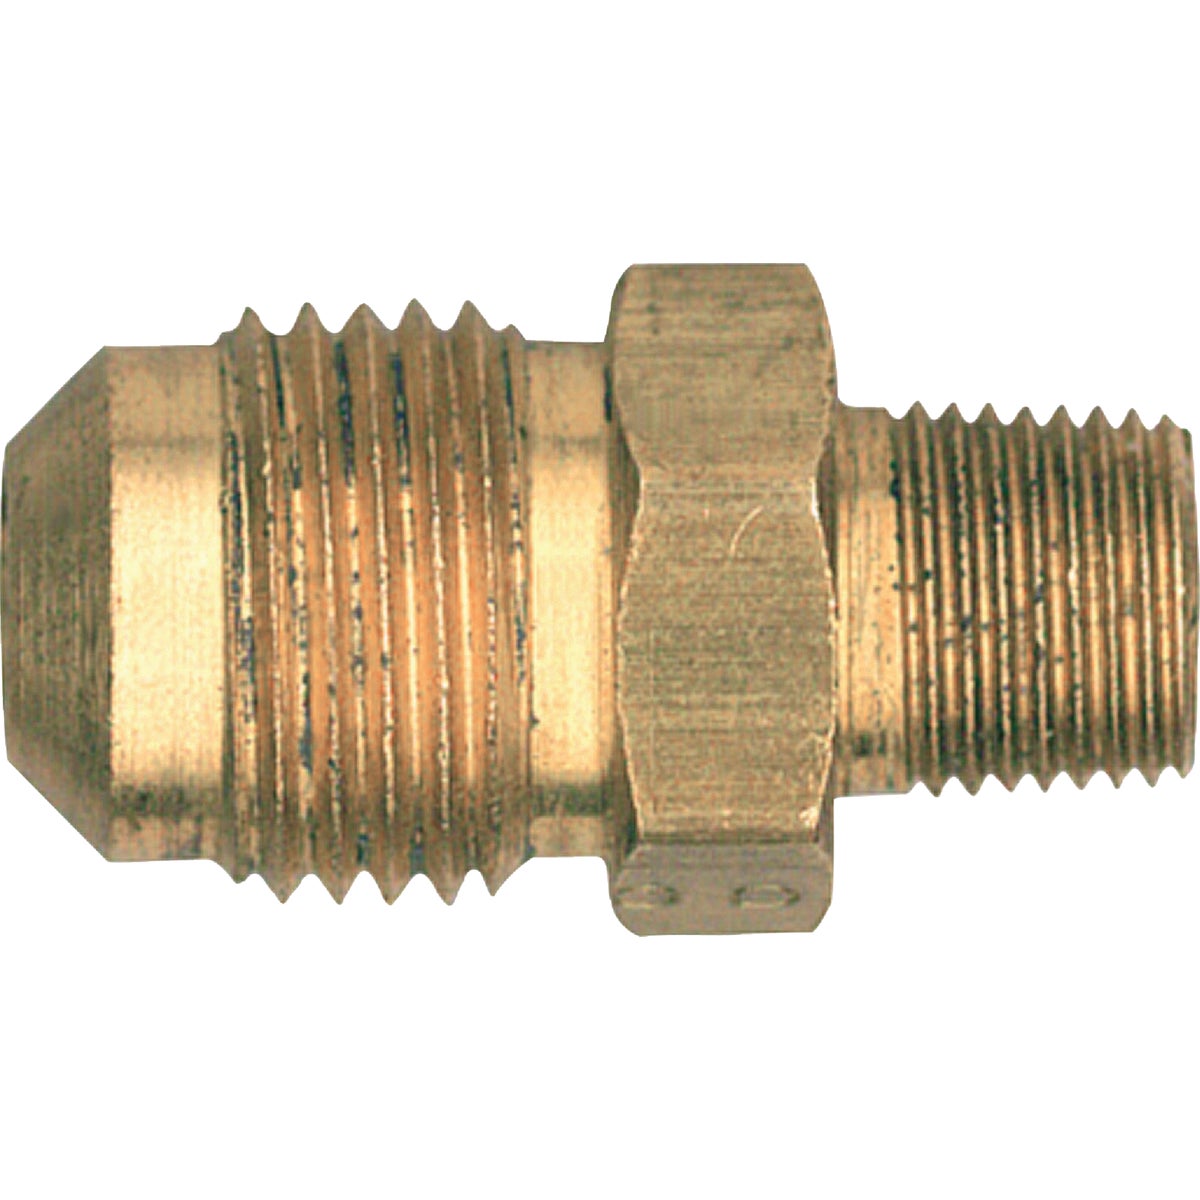 Item 801866, Replacement brass orifice for fryer burner in Bayou Classic single burners